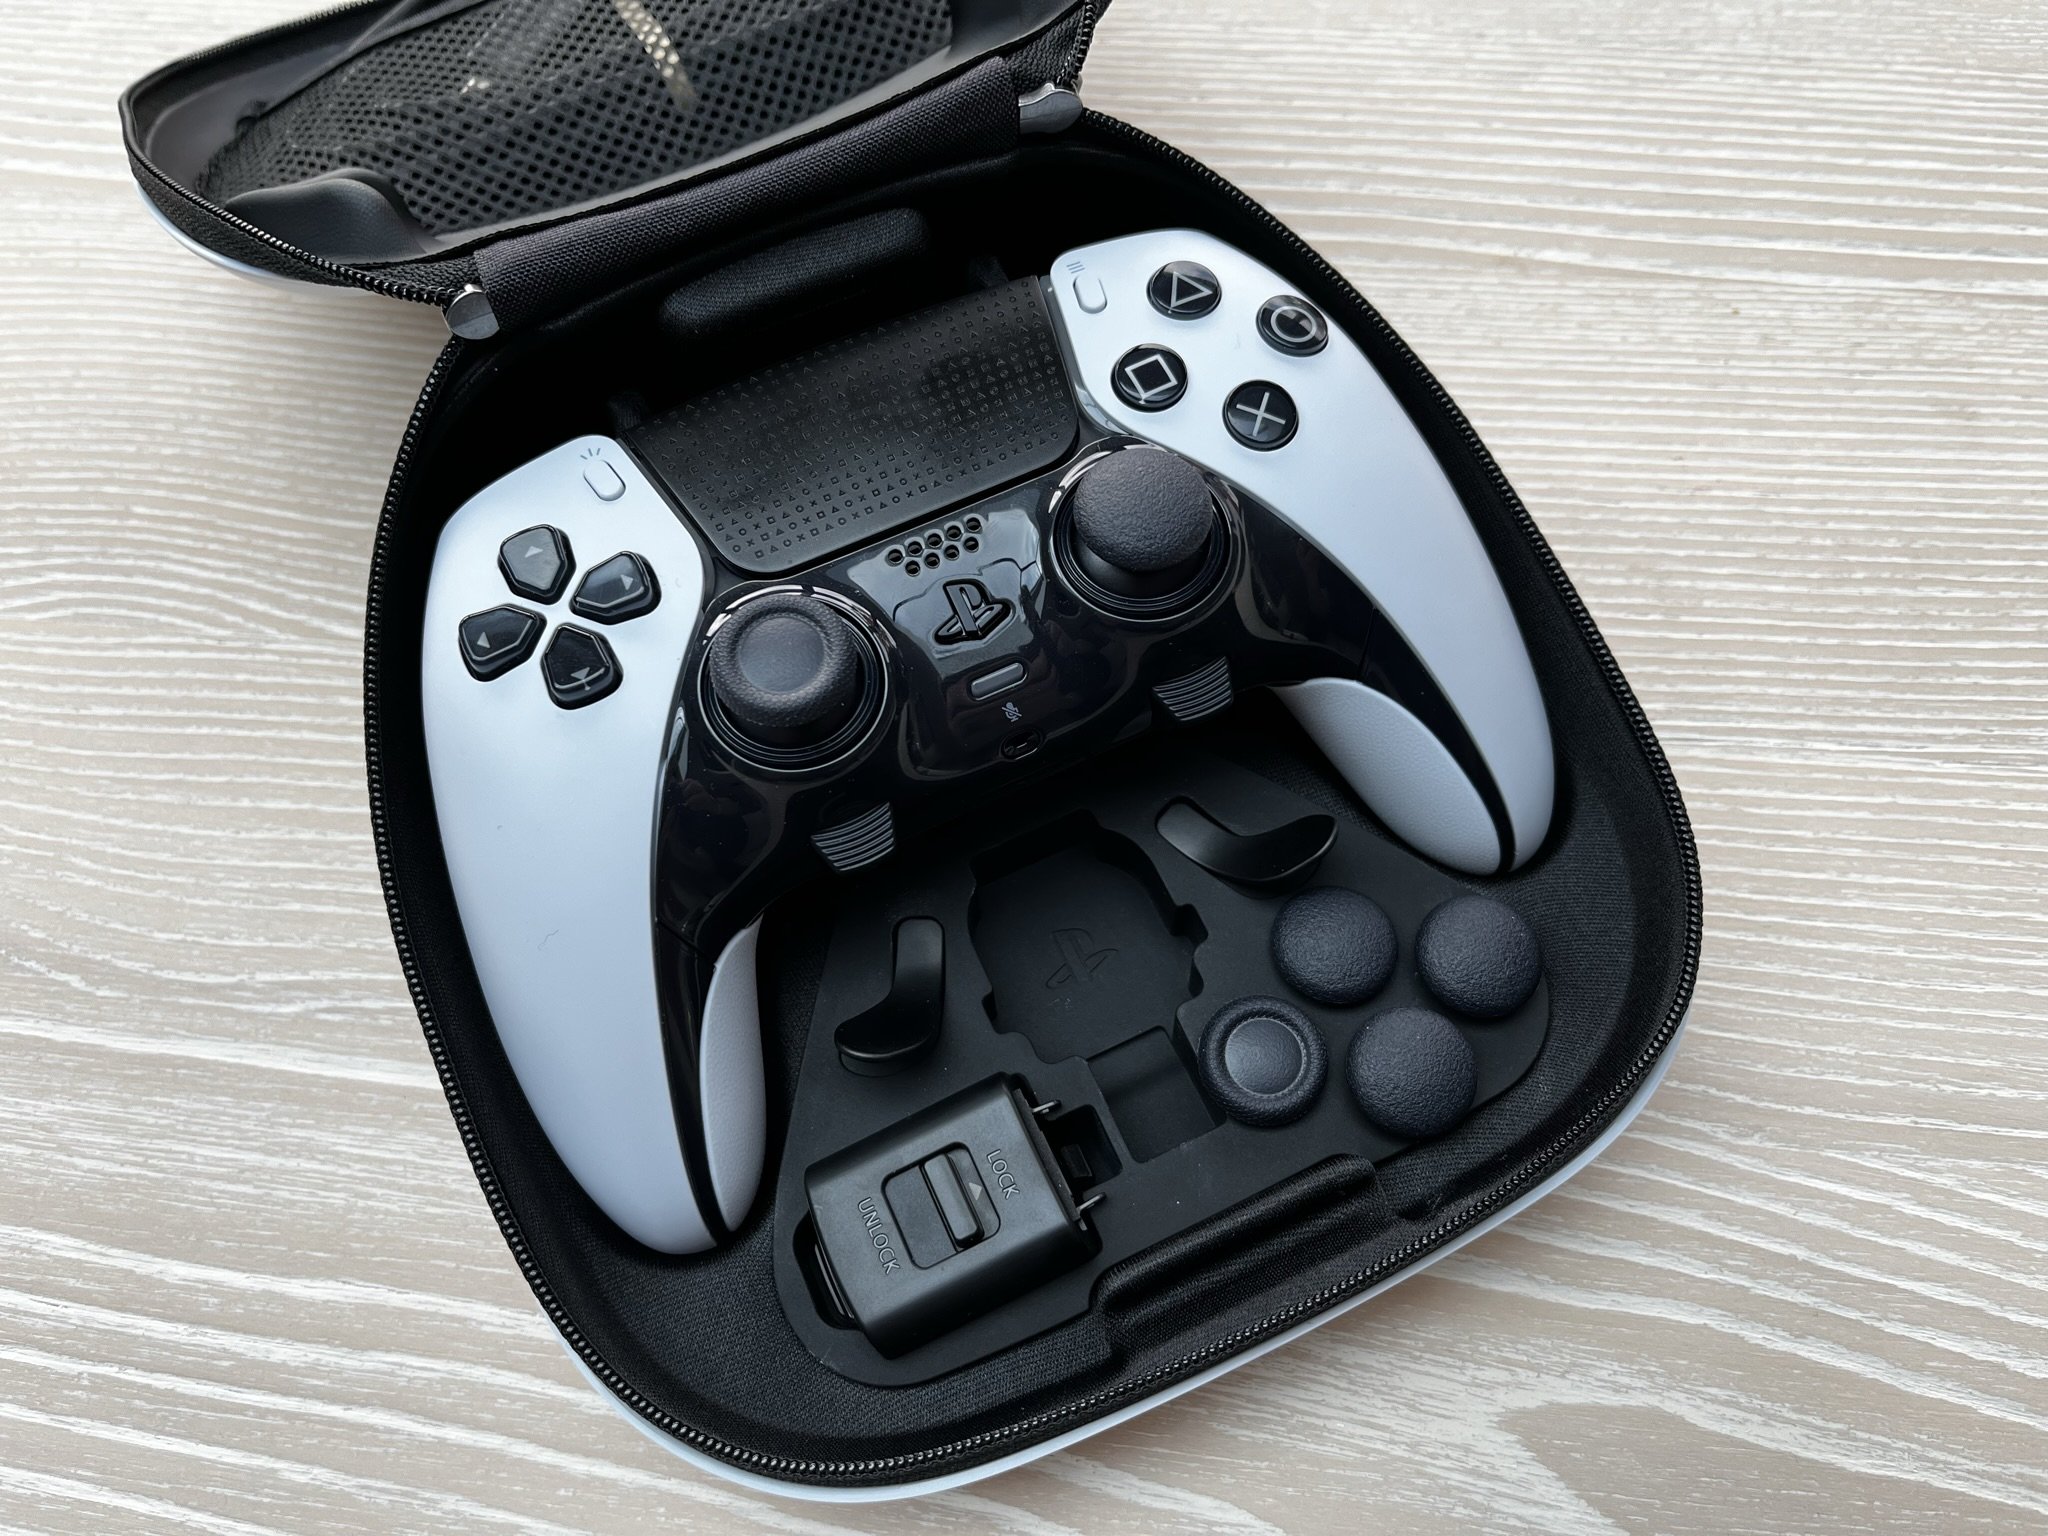 Disappointment as DualSense Edge PS5 Controller Sports Smaller Battery  Lasting Six Hours